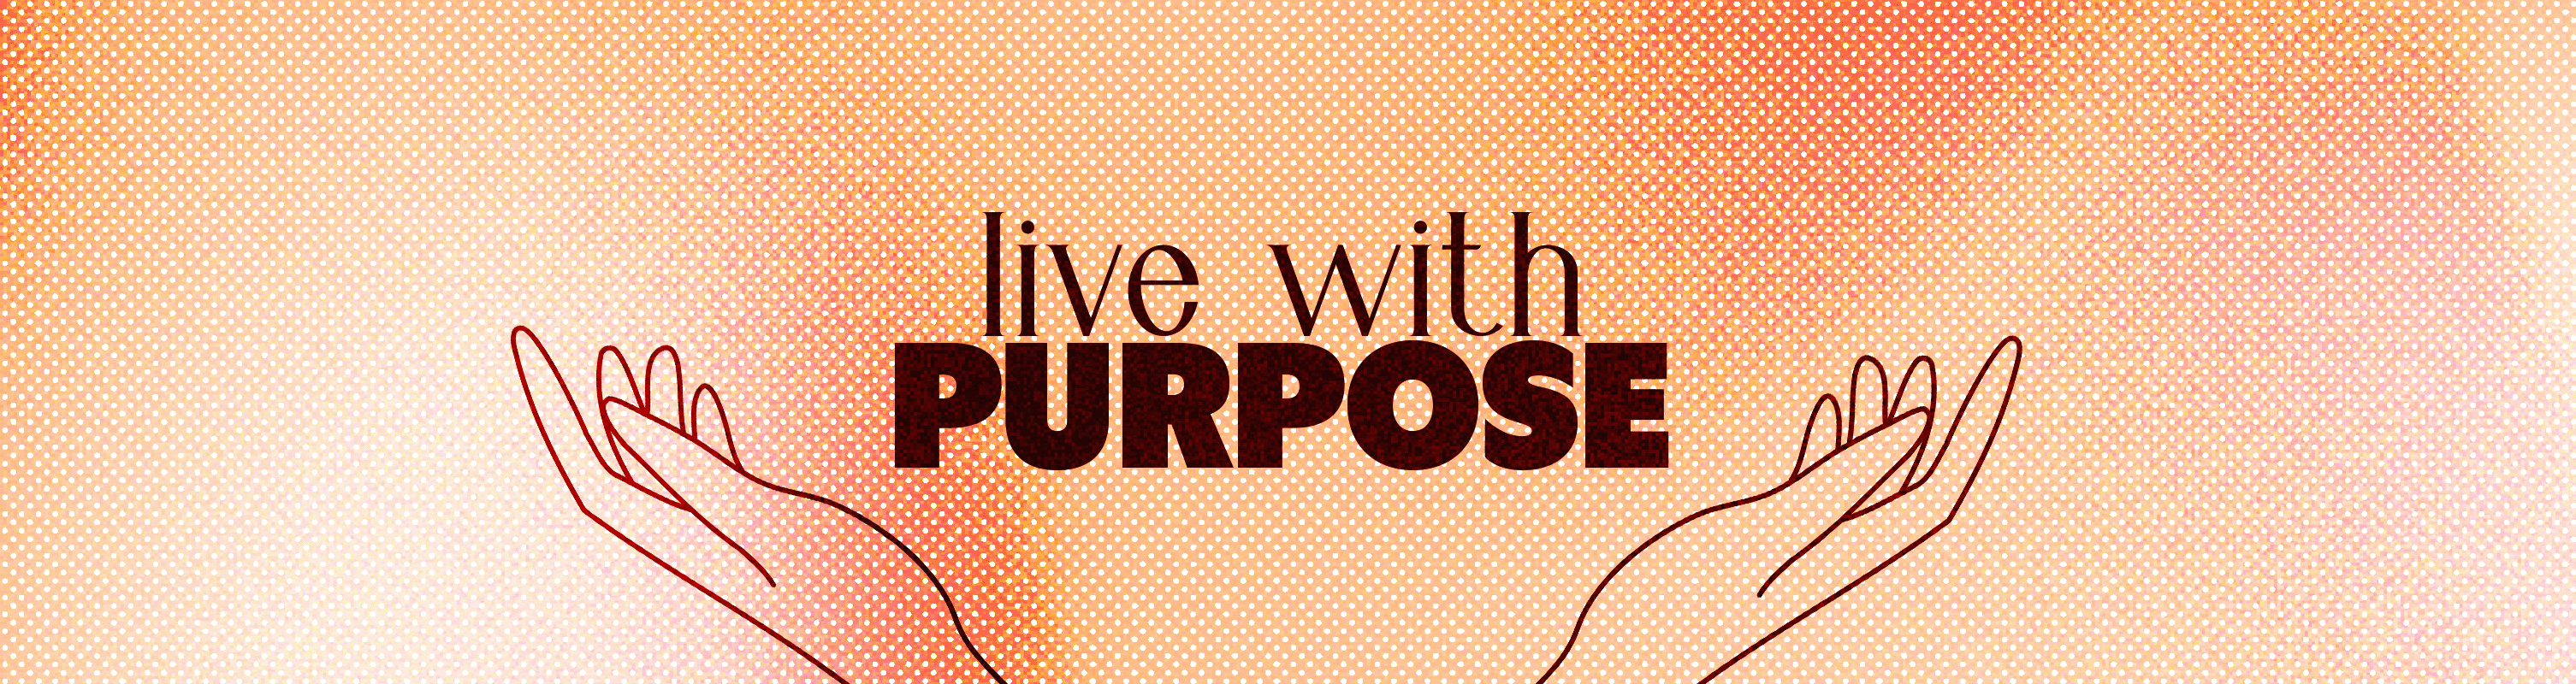 LIVE-WITH-PURPOSE-Pro